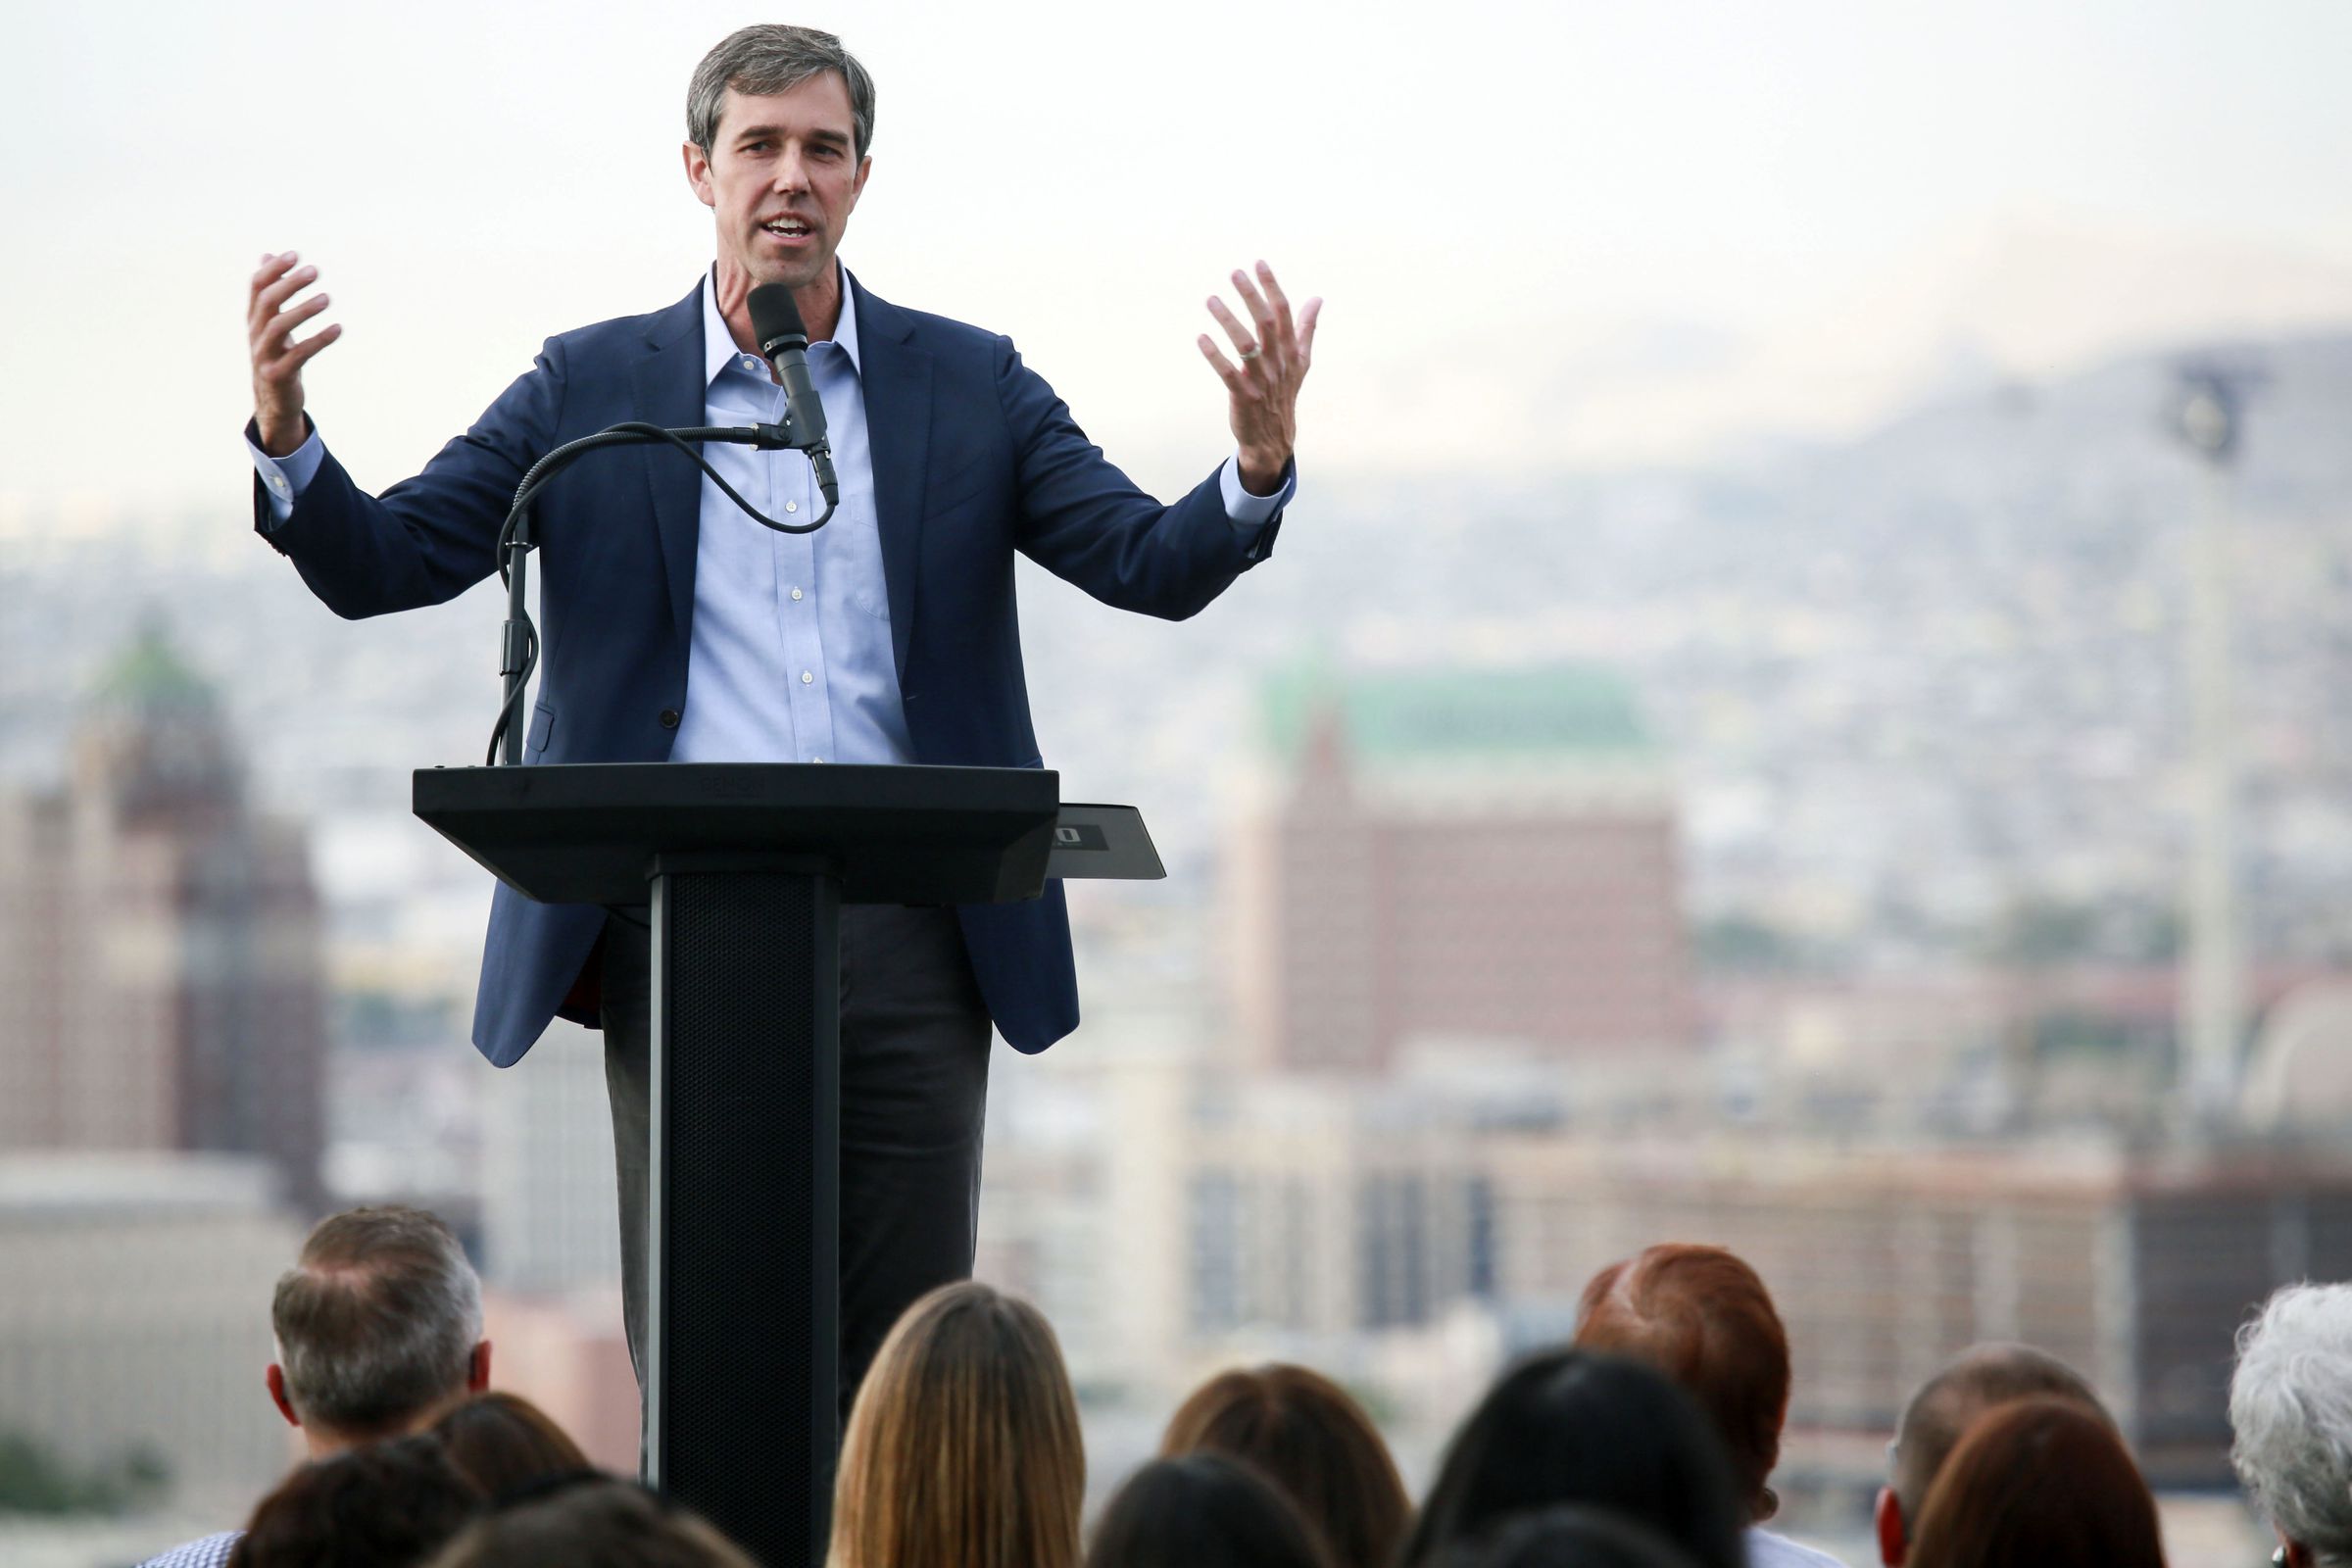 Democratic Presidential Candidate Beto O’Rourke Gives Campaign Address In His Hometown Town Of El Paso, Texas